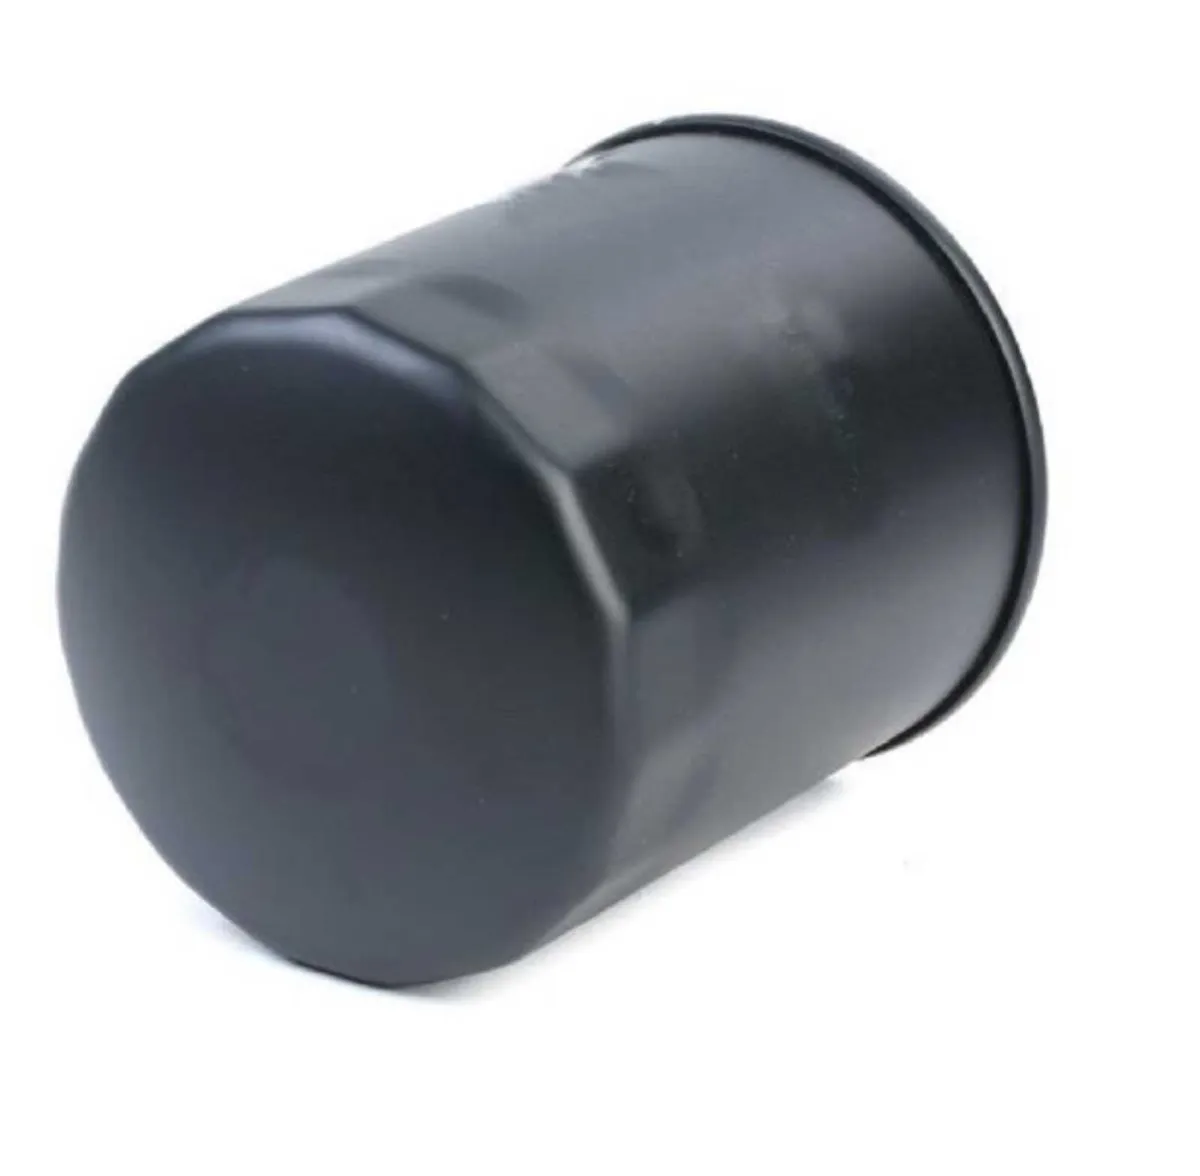 Oil Filter Toyota Hilux 1989-1997 - Image 1